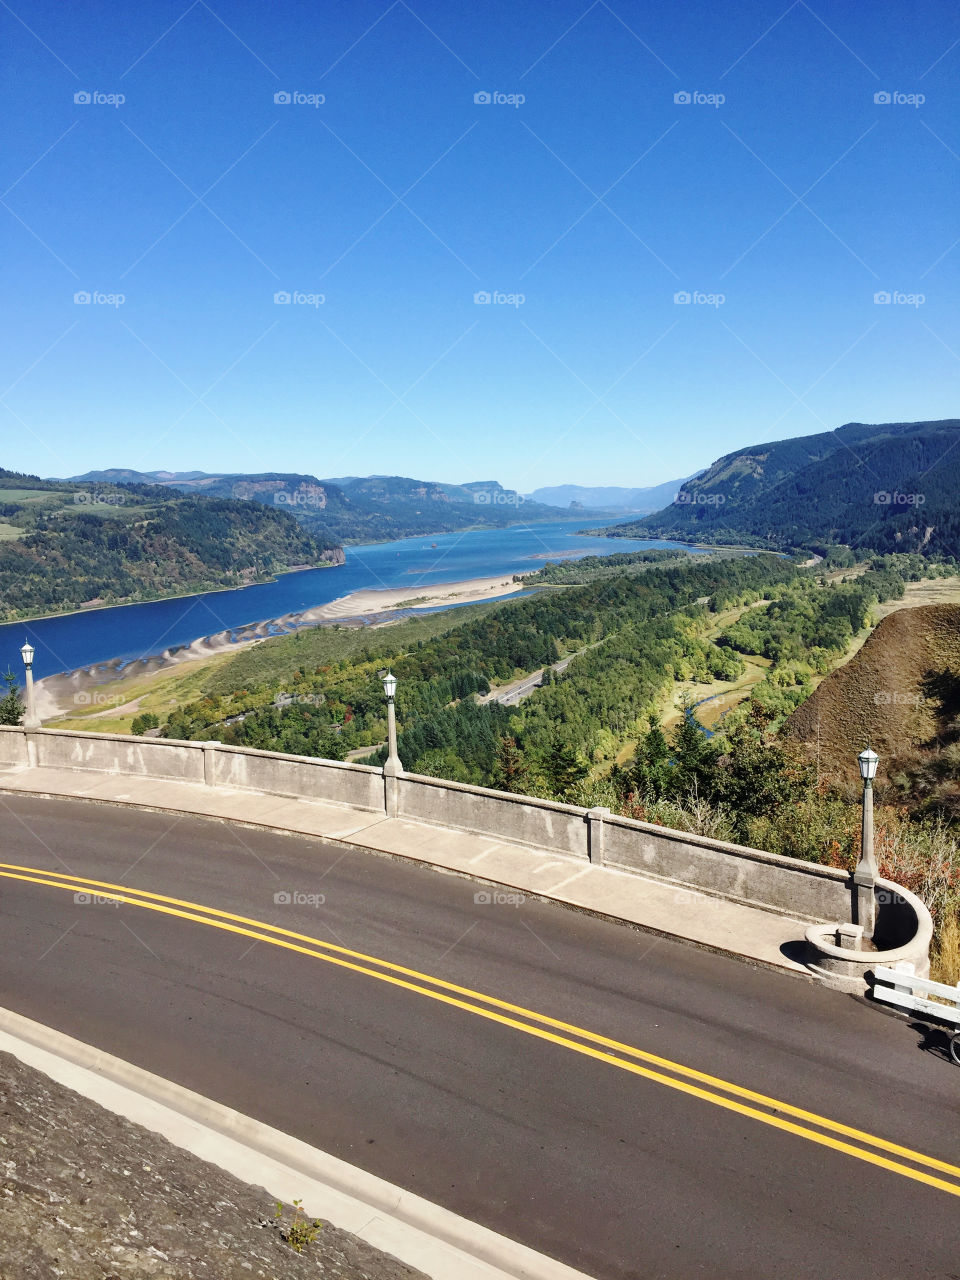 Columbia River Gorge. Scenic view of the Columbia River Gorge from Crown Point Viewpoint